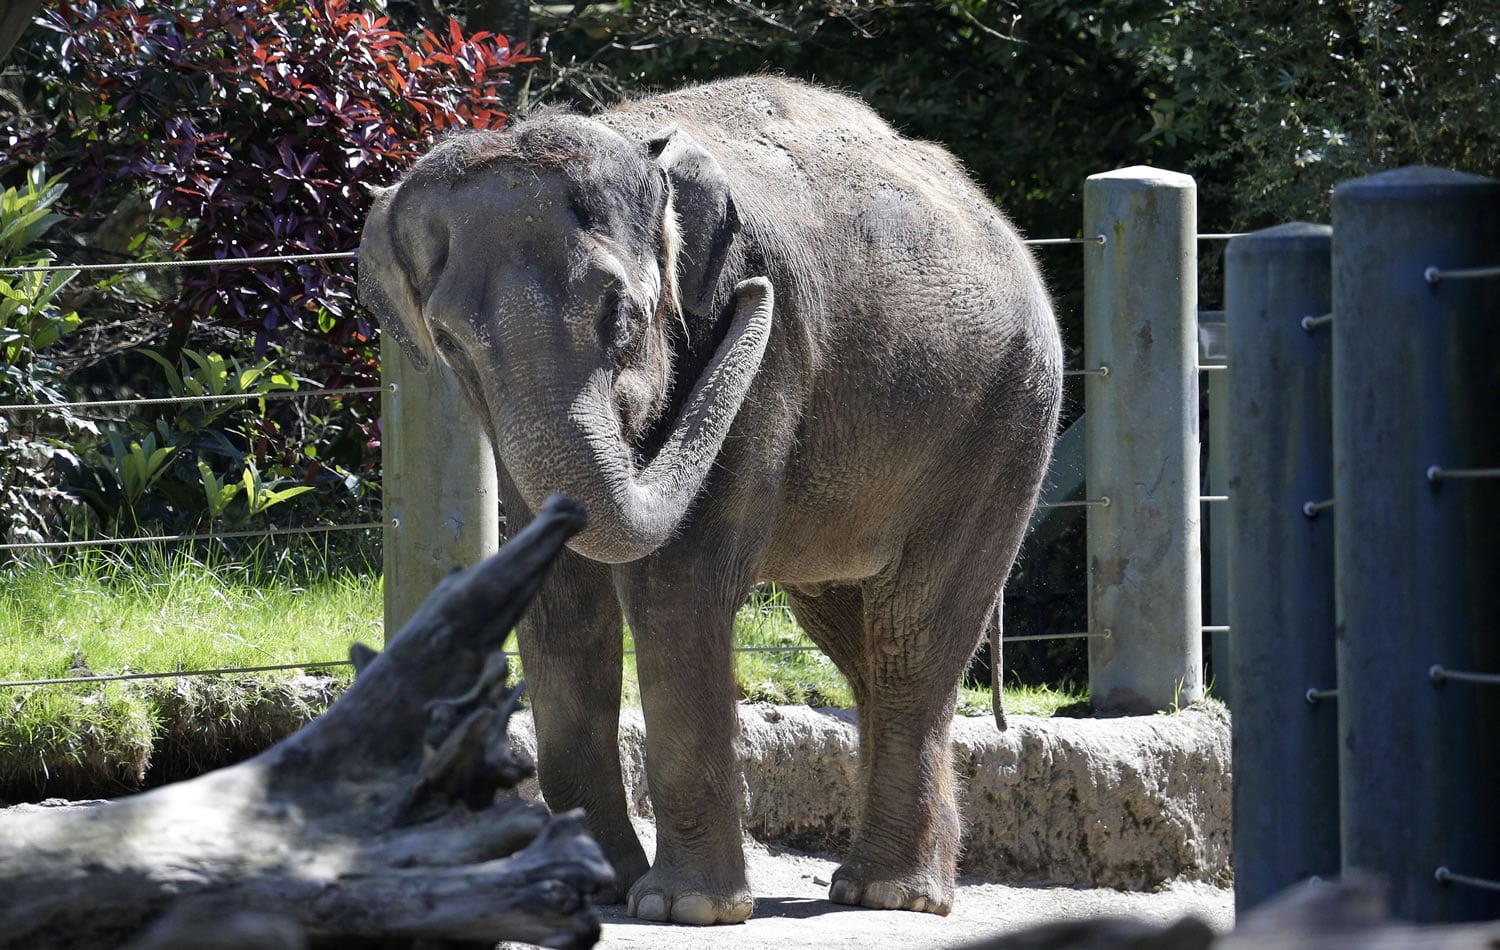 Chai, an Asian elephant, stands in her enclosure at the Woodland Park Zoo in April in Seattle. Chai, one of the two elephants that were at the center of a controversial move from Seattle's Woodland Park Zoo to Oklahoma City last year, has died. The Oklahoma City Zoo announced Saturday that Chai was found dead in the elephant yard.